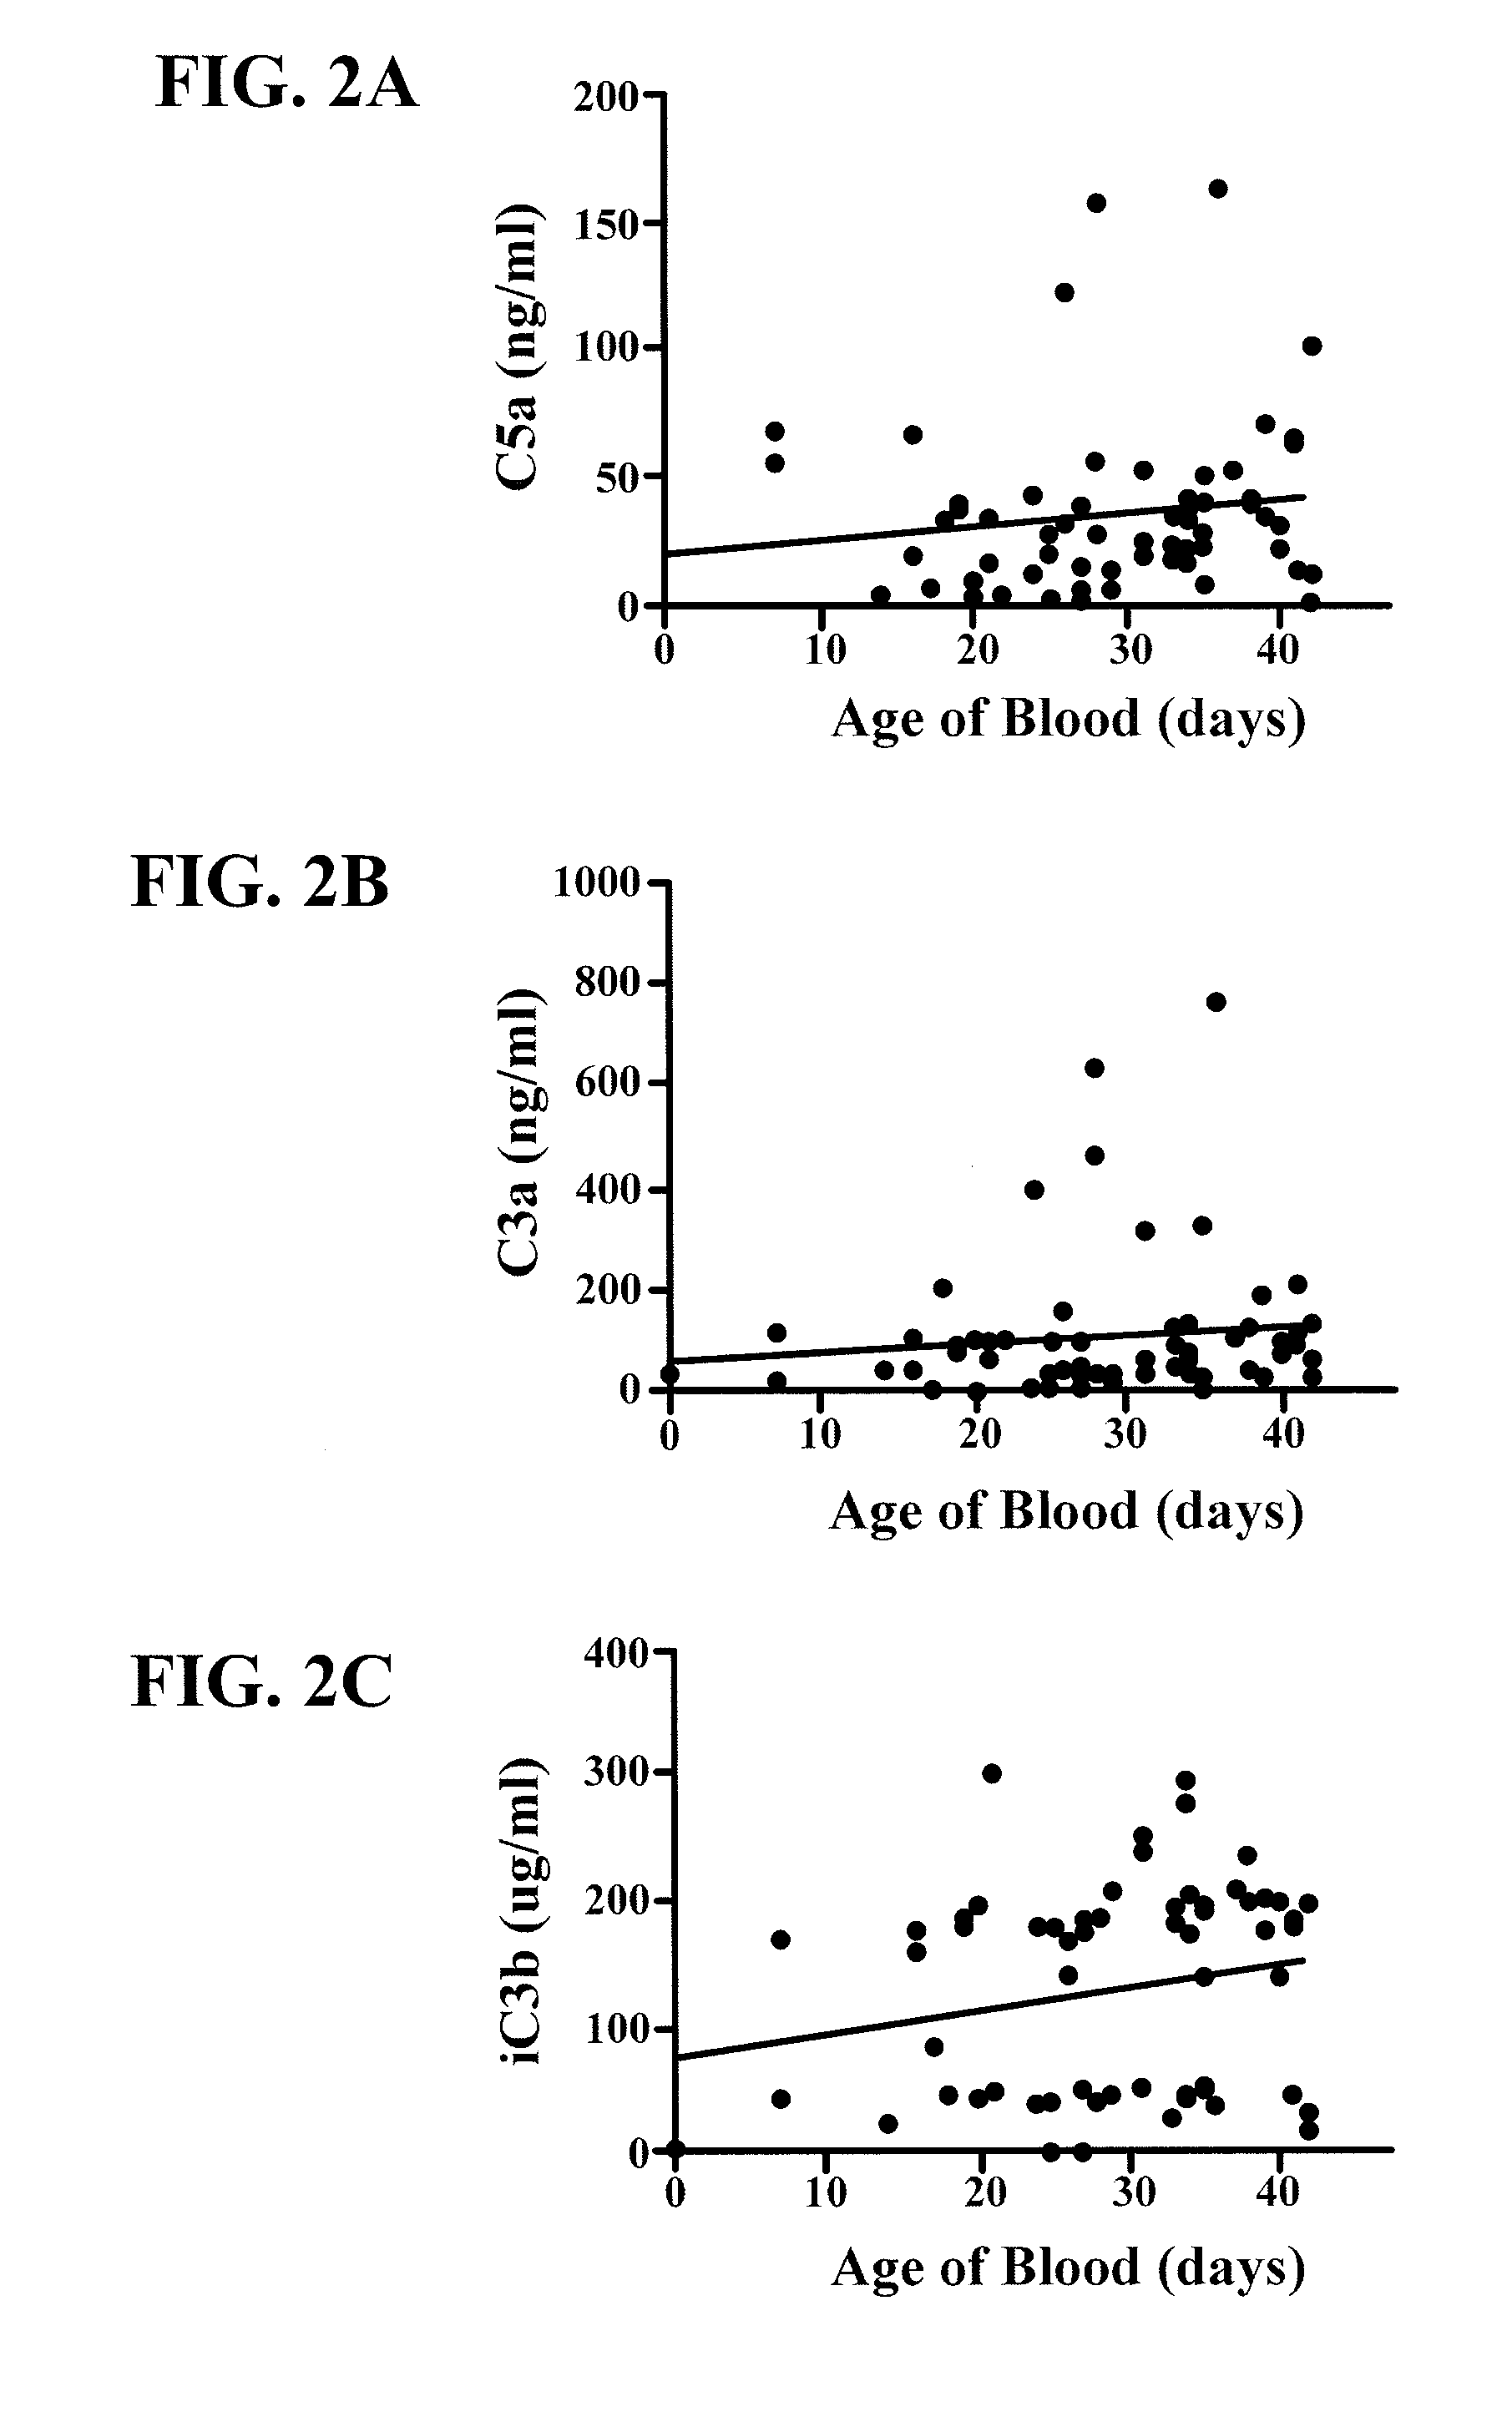 Anti-complement therapy compositions and methods for preserving stored blood